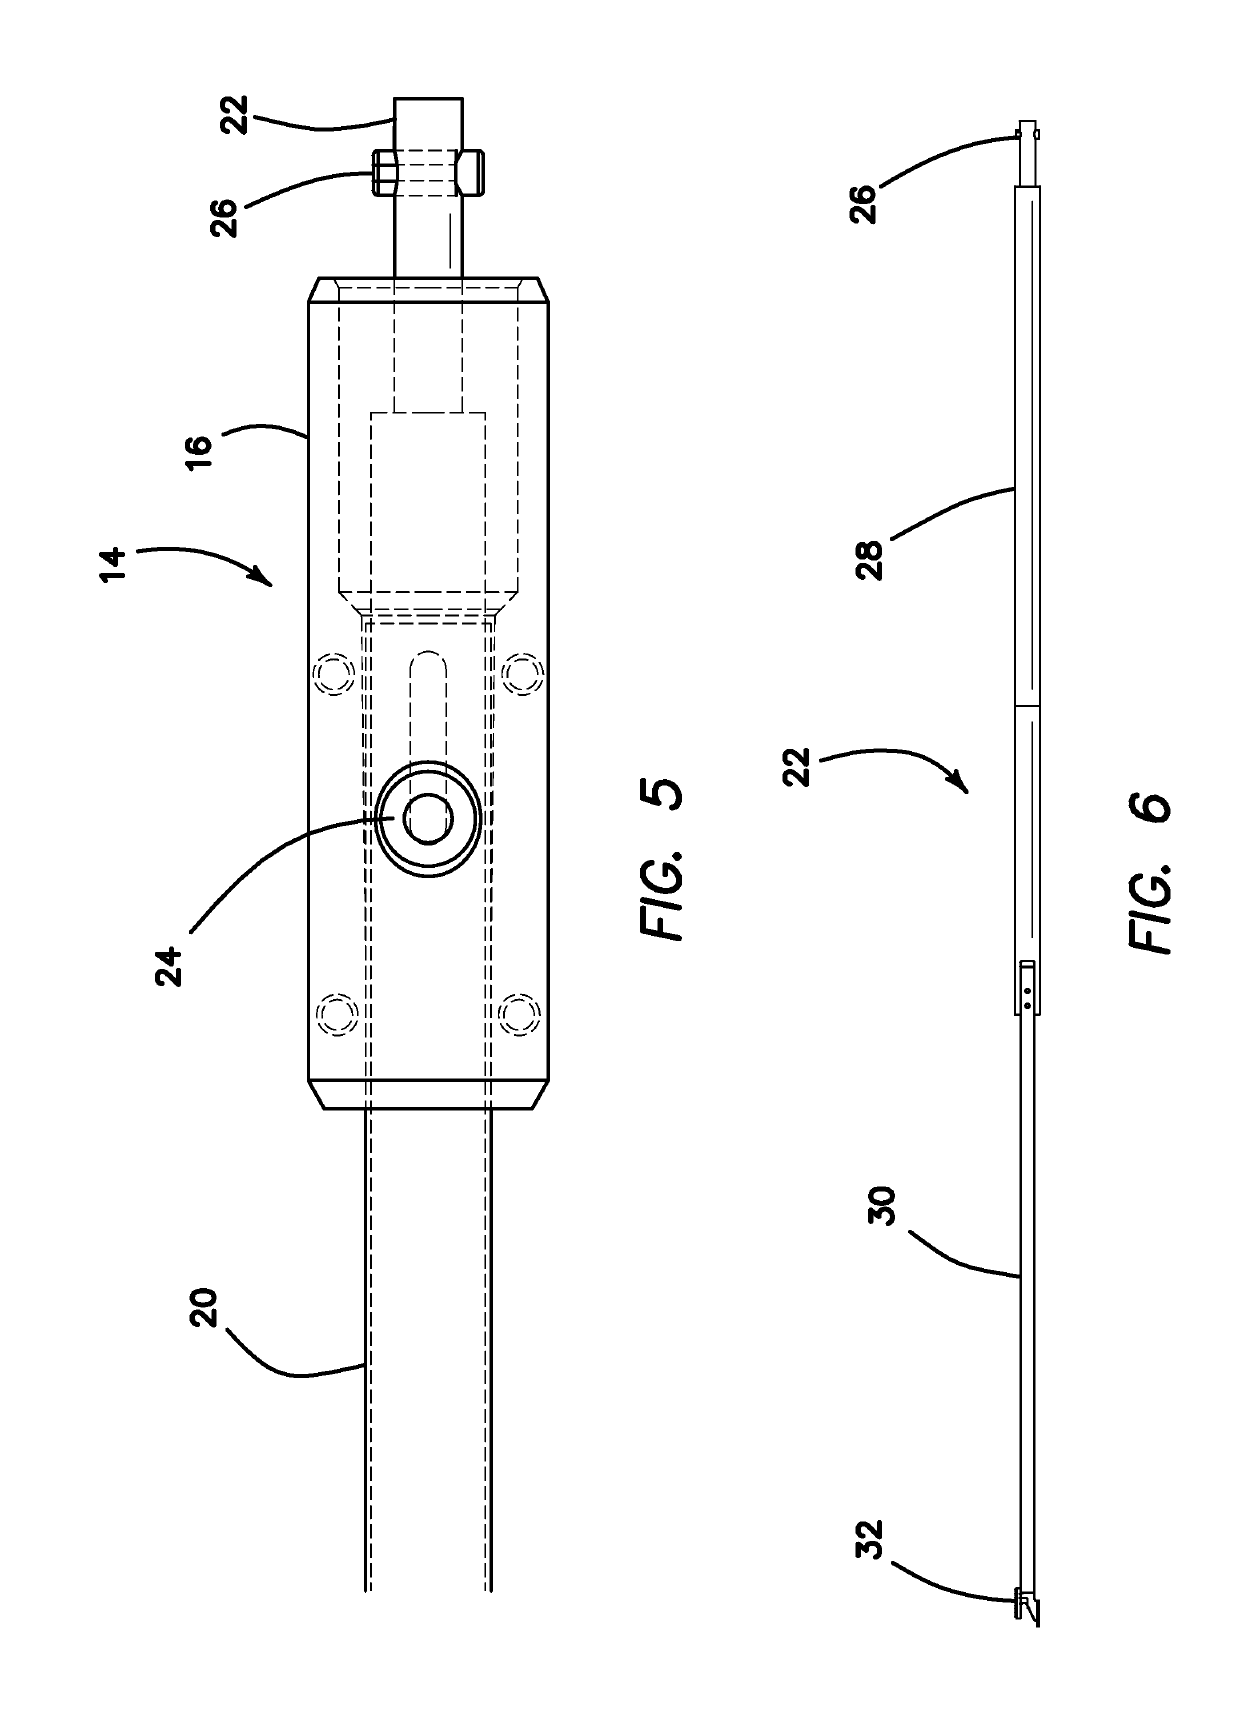 Surgical stapler with circumferential firing